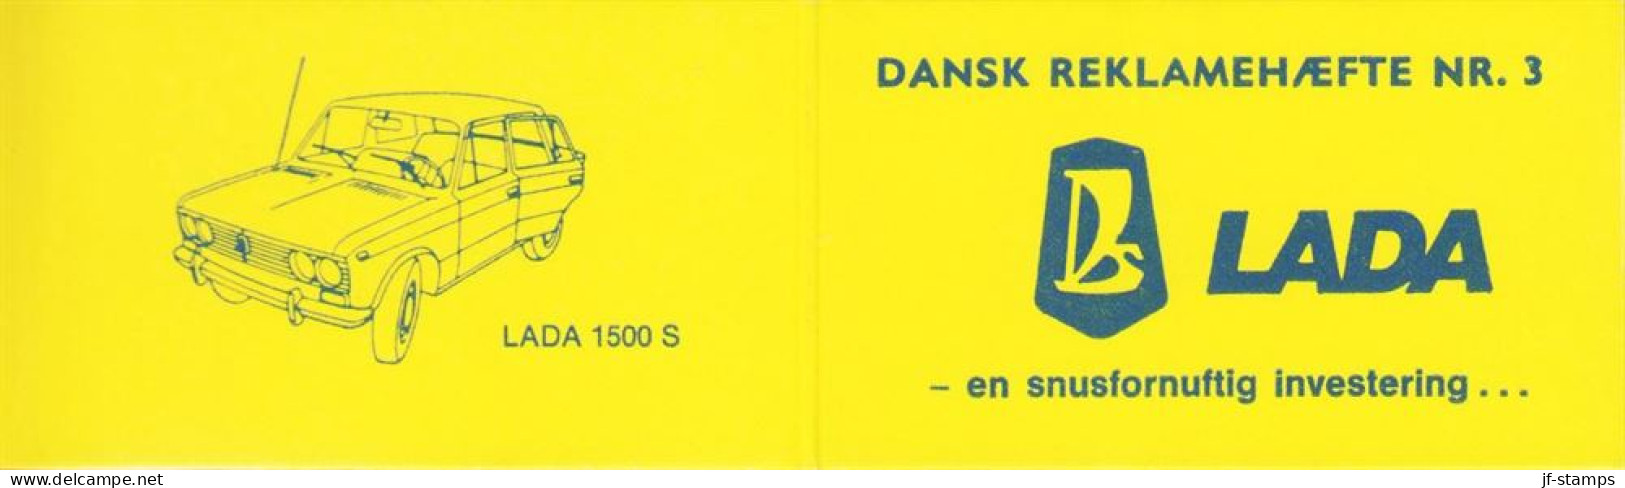 1977. GRØNLAND. TELE 90 Øre Falcon In Pair Together With 10 Øre Margrethe In Pair. DANSK ... (Michel 94 + 84) - JF545589 - Unused Stamps